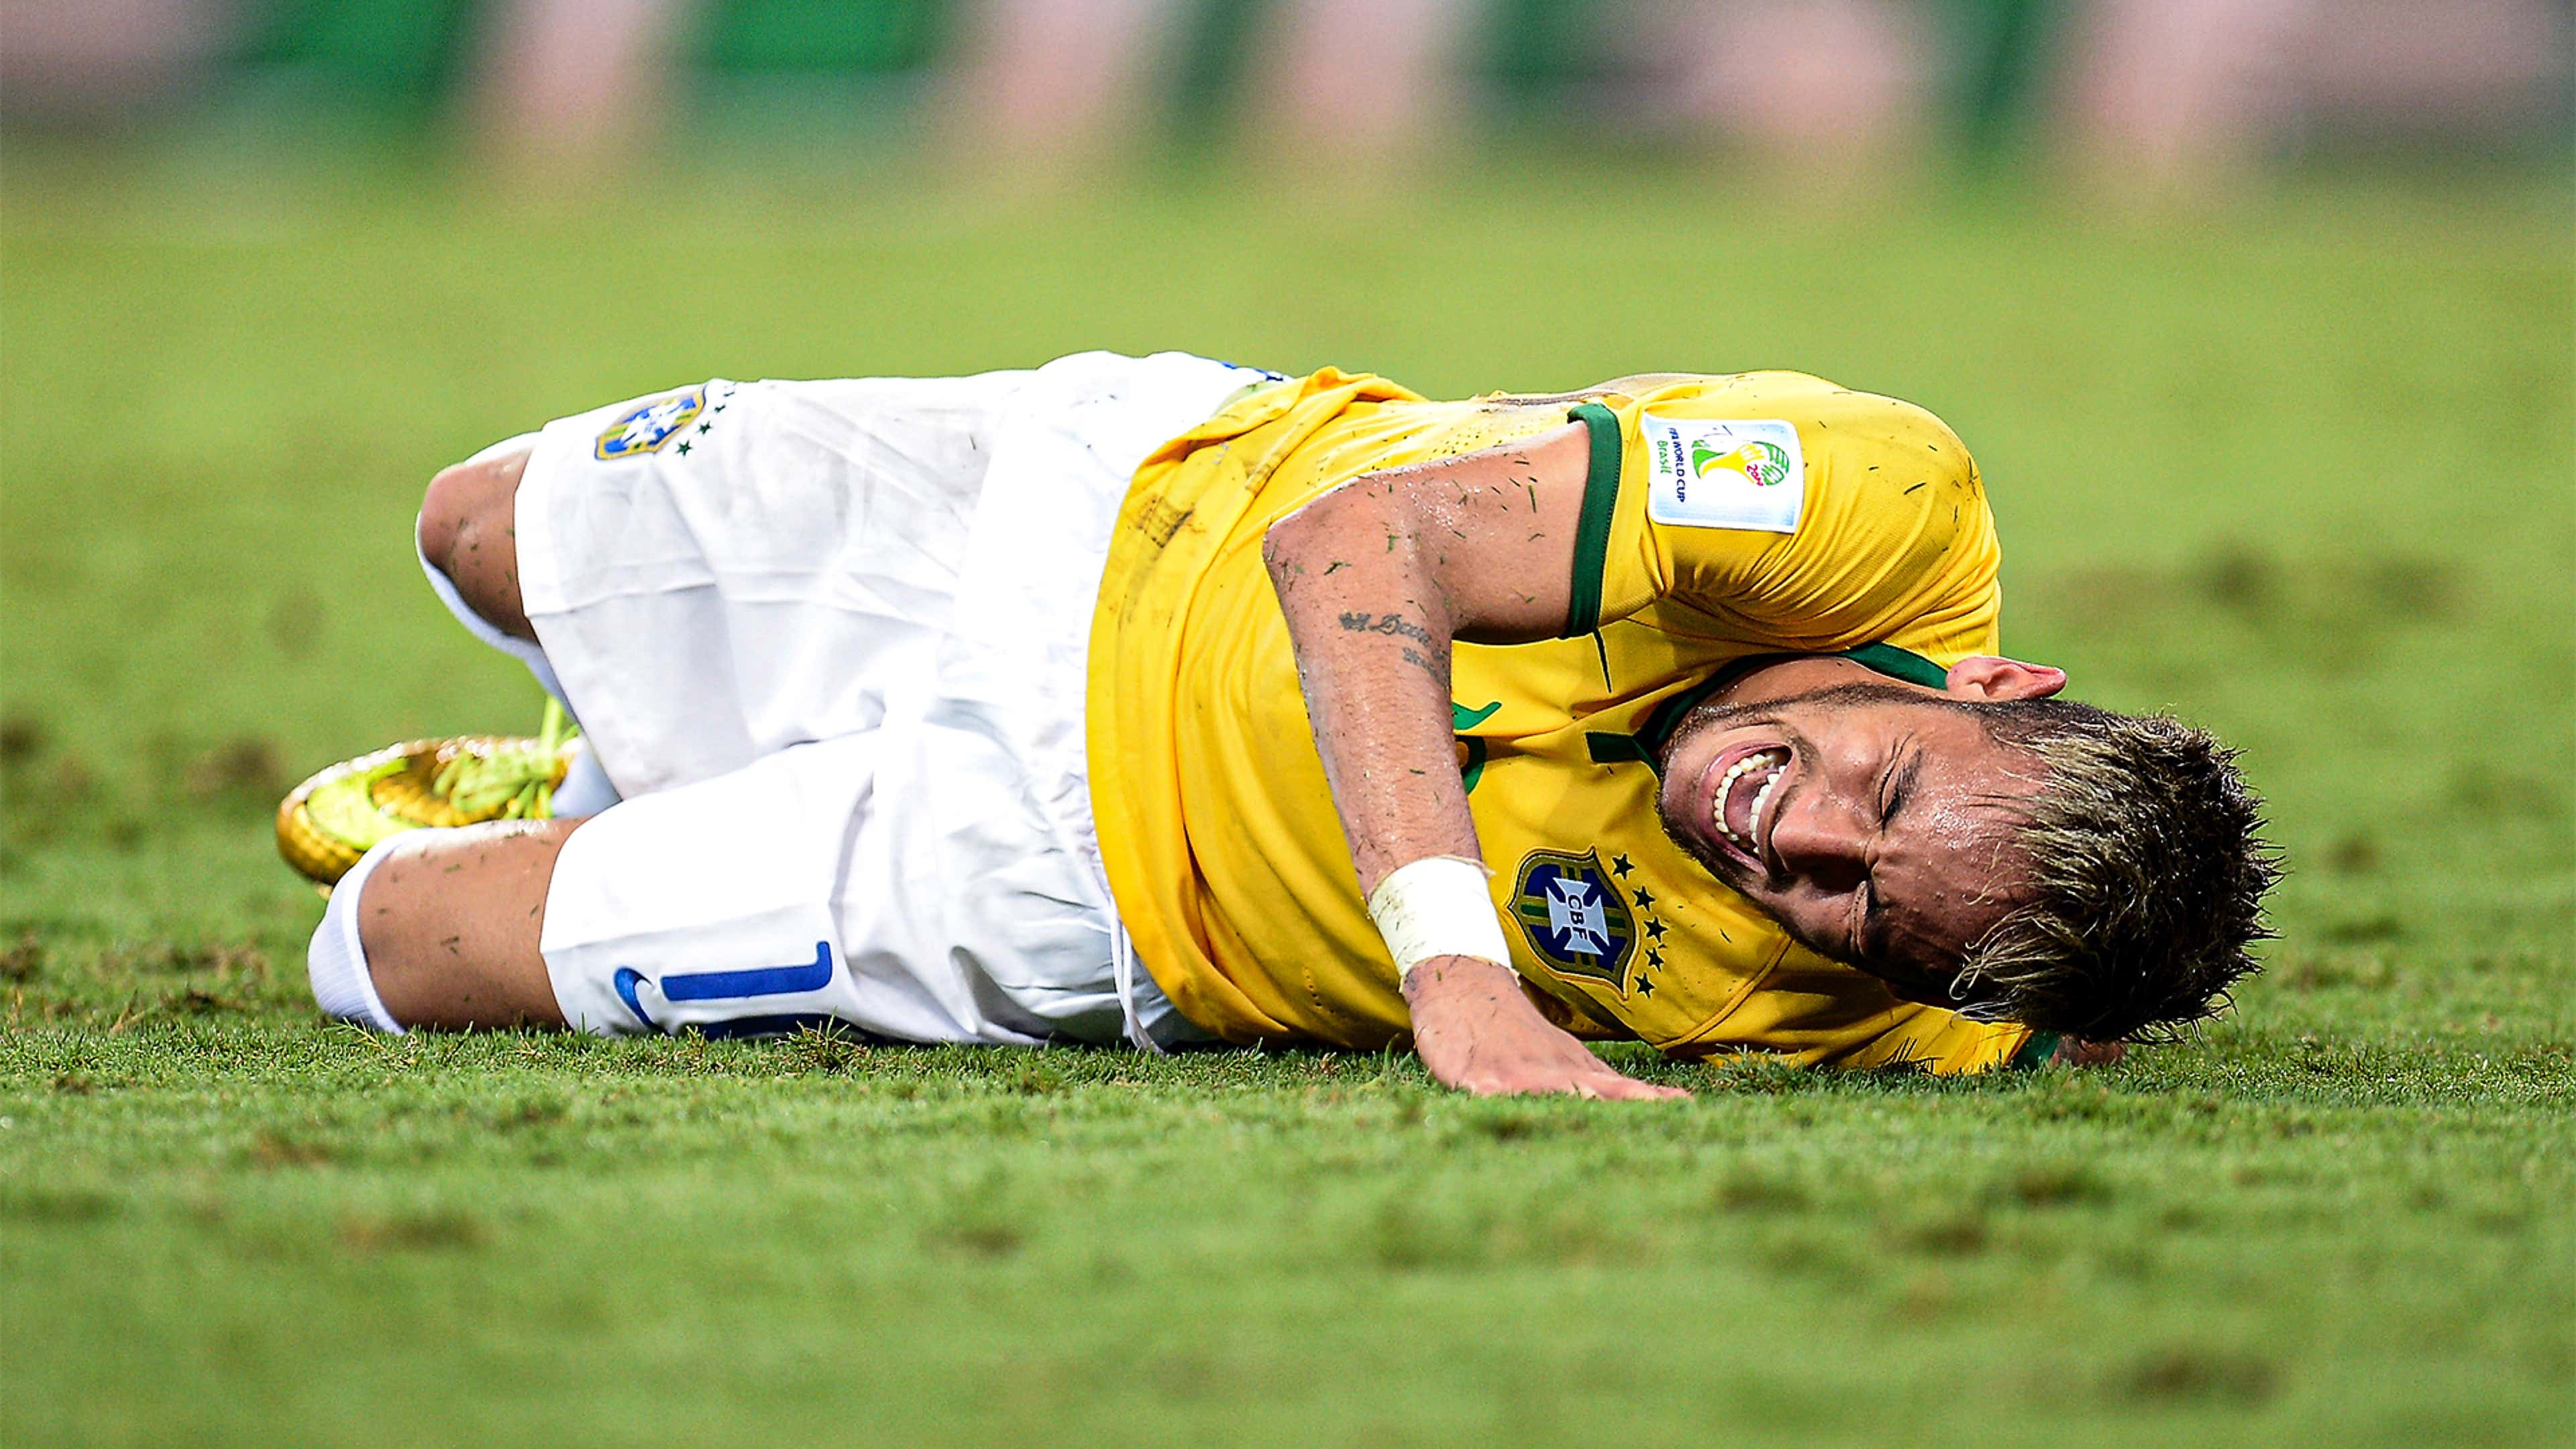 Neymar's latest World Cup injury worry turns up bad Brazilian memories of  2014 back fracture